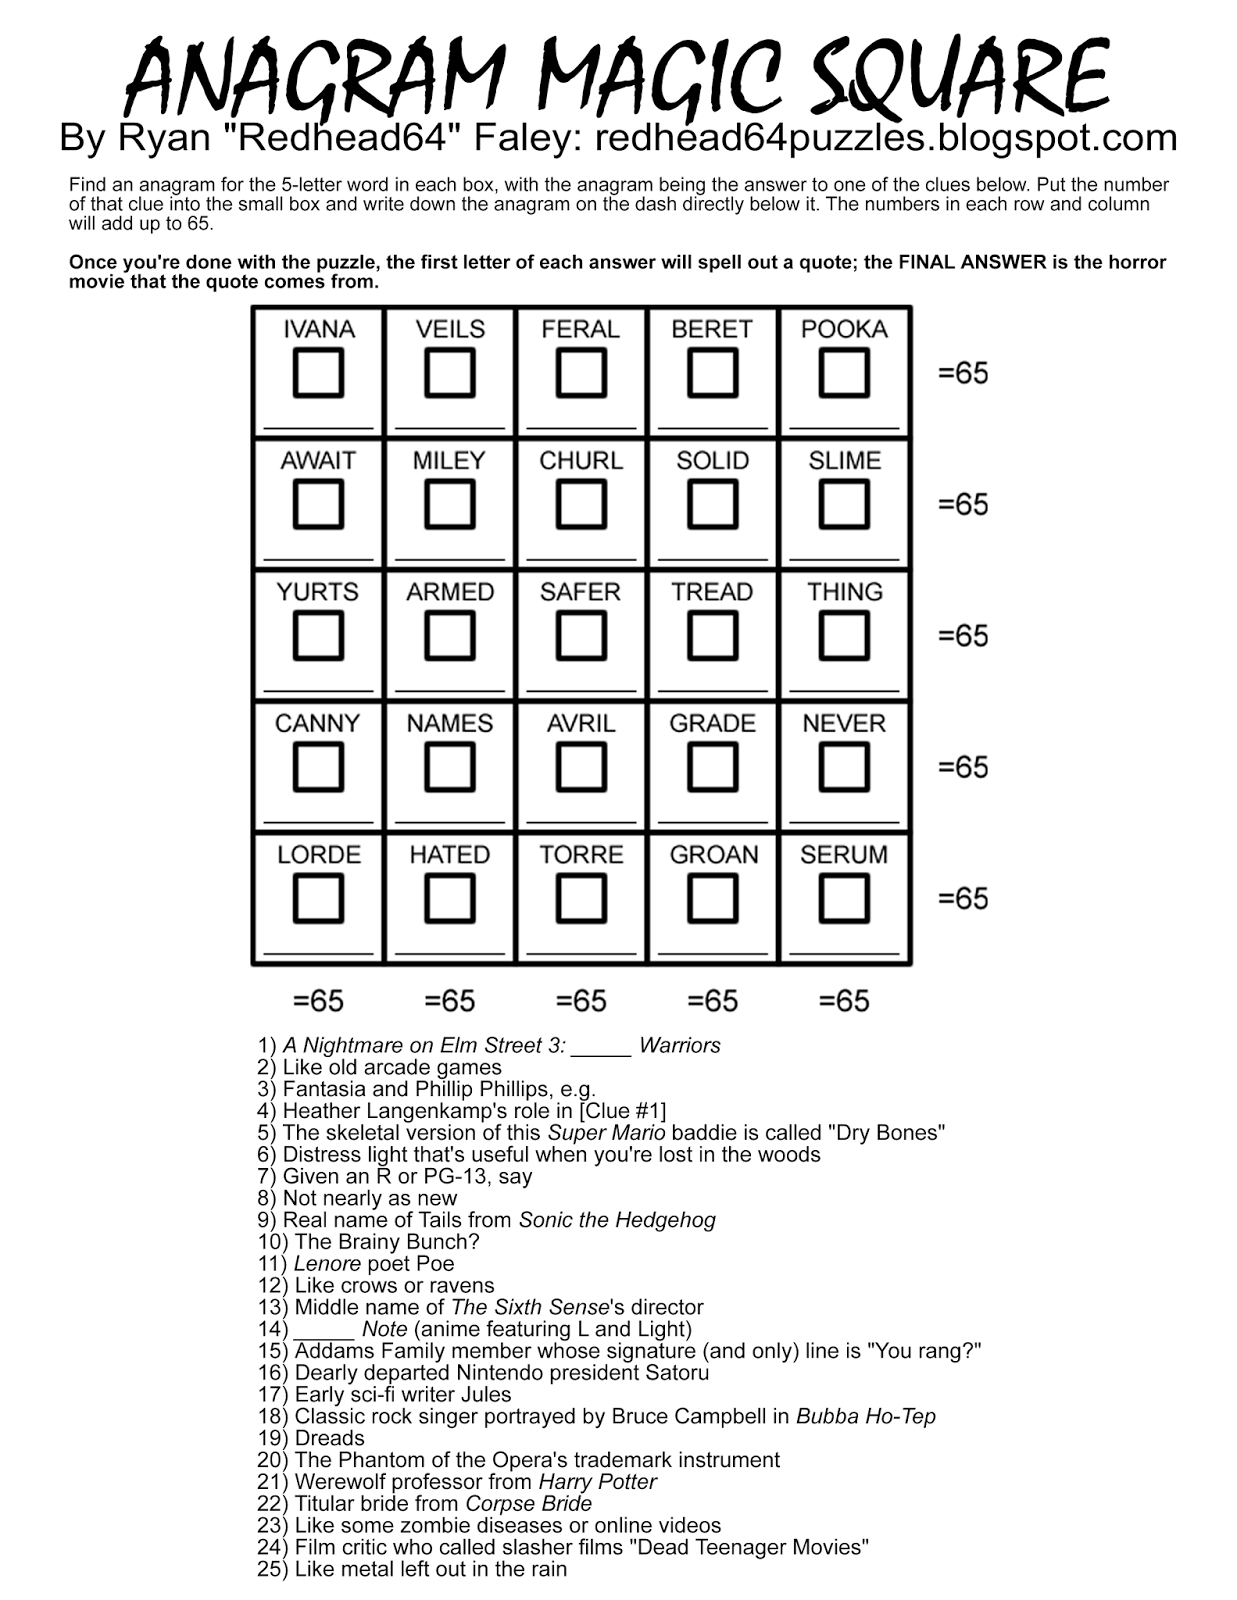 Redhead64&amp;#039;s Obscure Puzzle Blog!: Halloween Month! Puzzle #45 - Free Printable Anagram Magic Square Puzzles